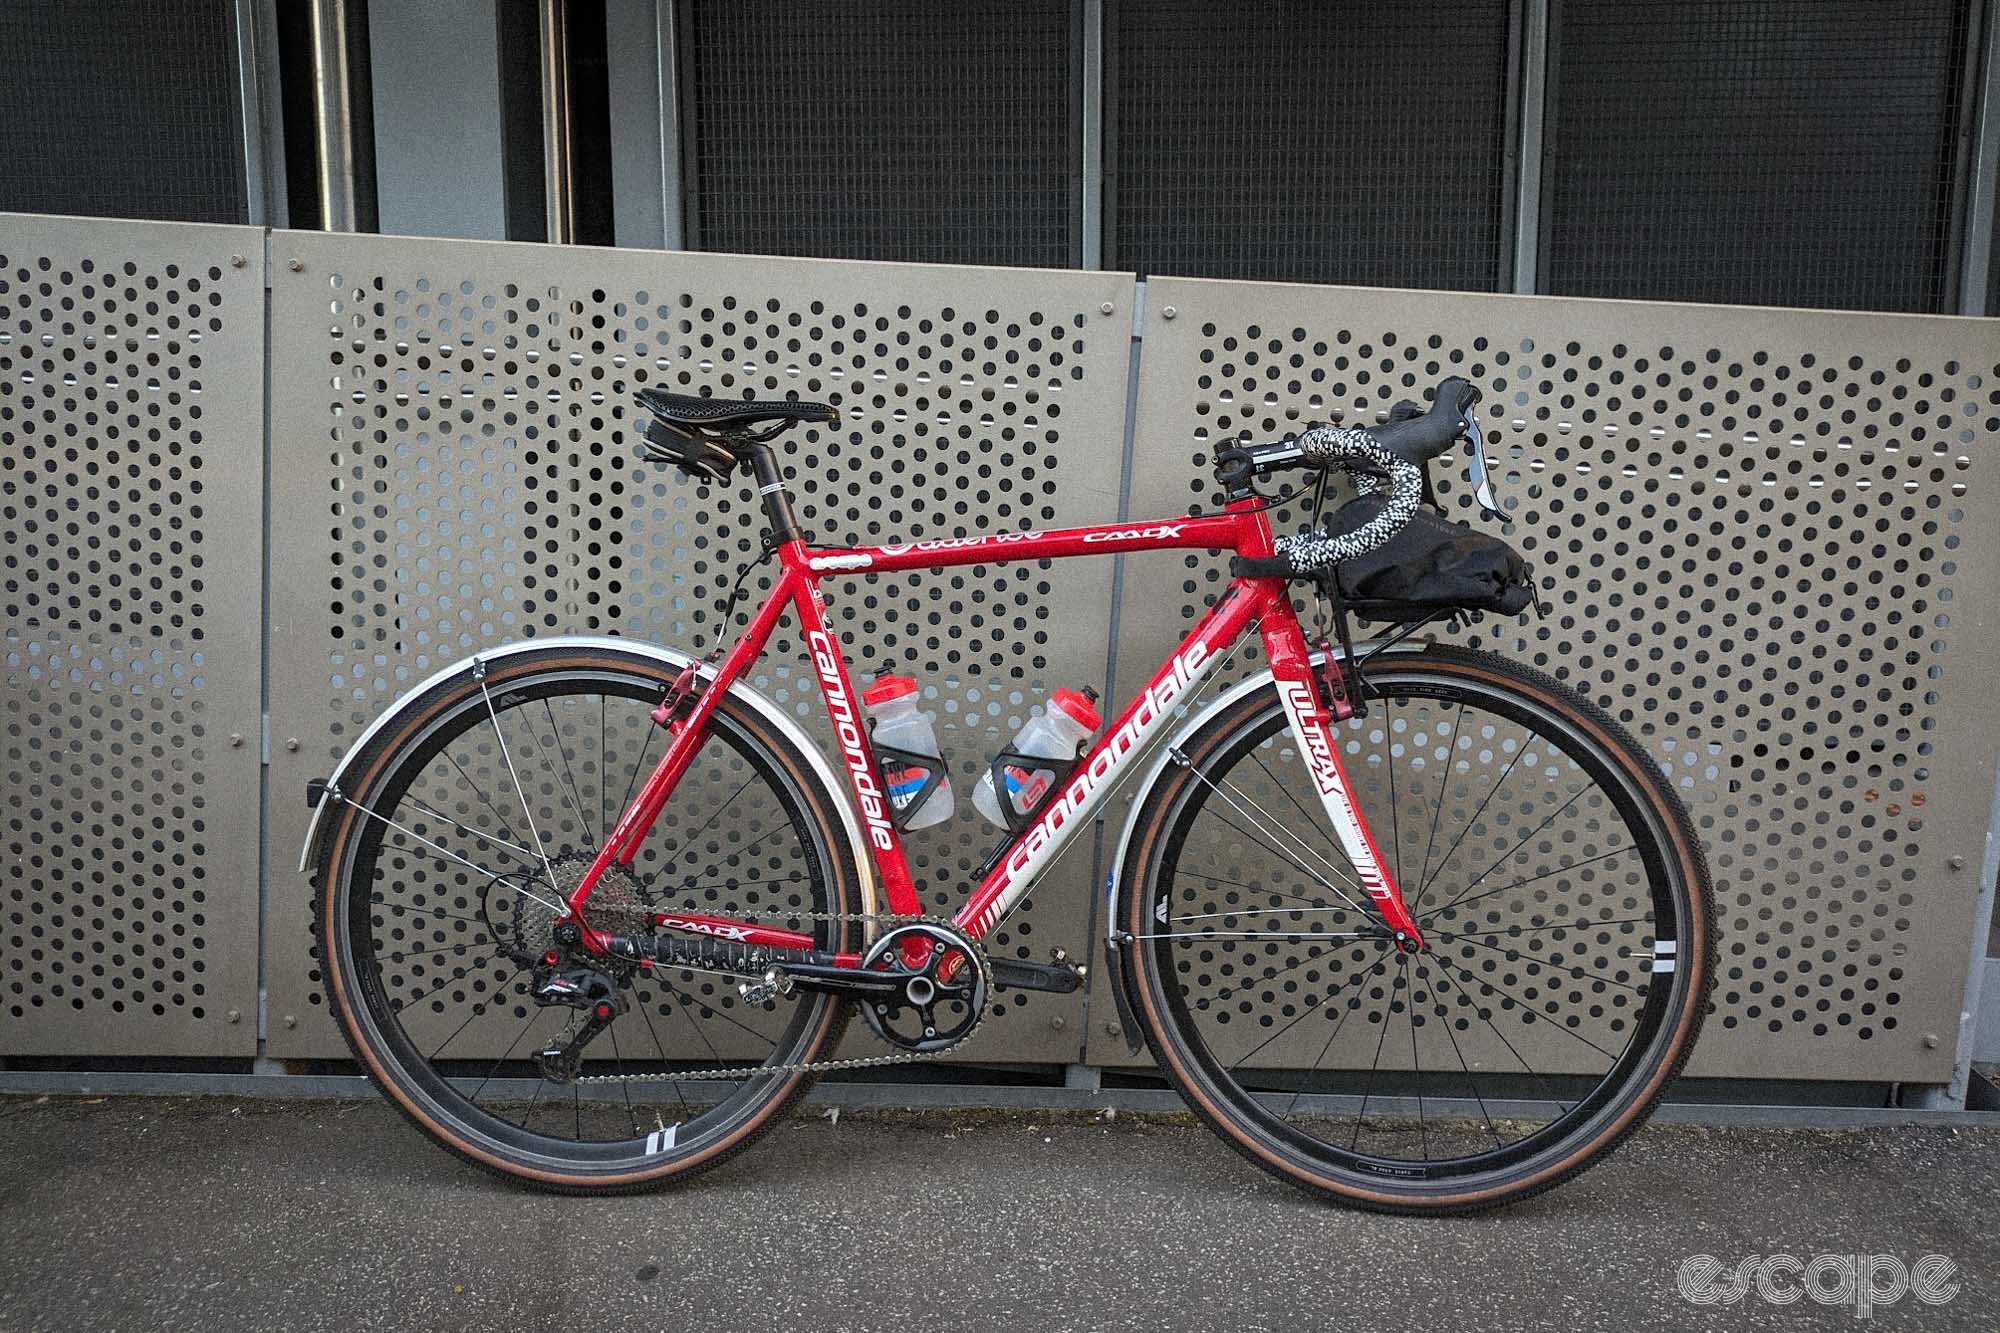 Red Cannondale CAADX, leaning against a fence, with mudguards, fat tanwall tyres, 1x groupset, v-brakes and a front rack with racktop bag. 